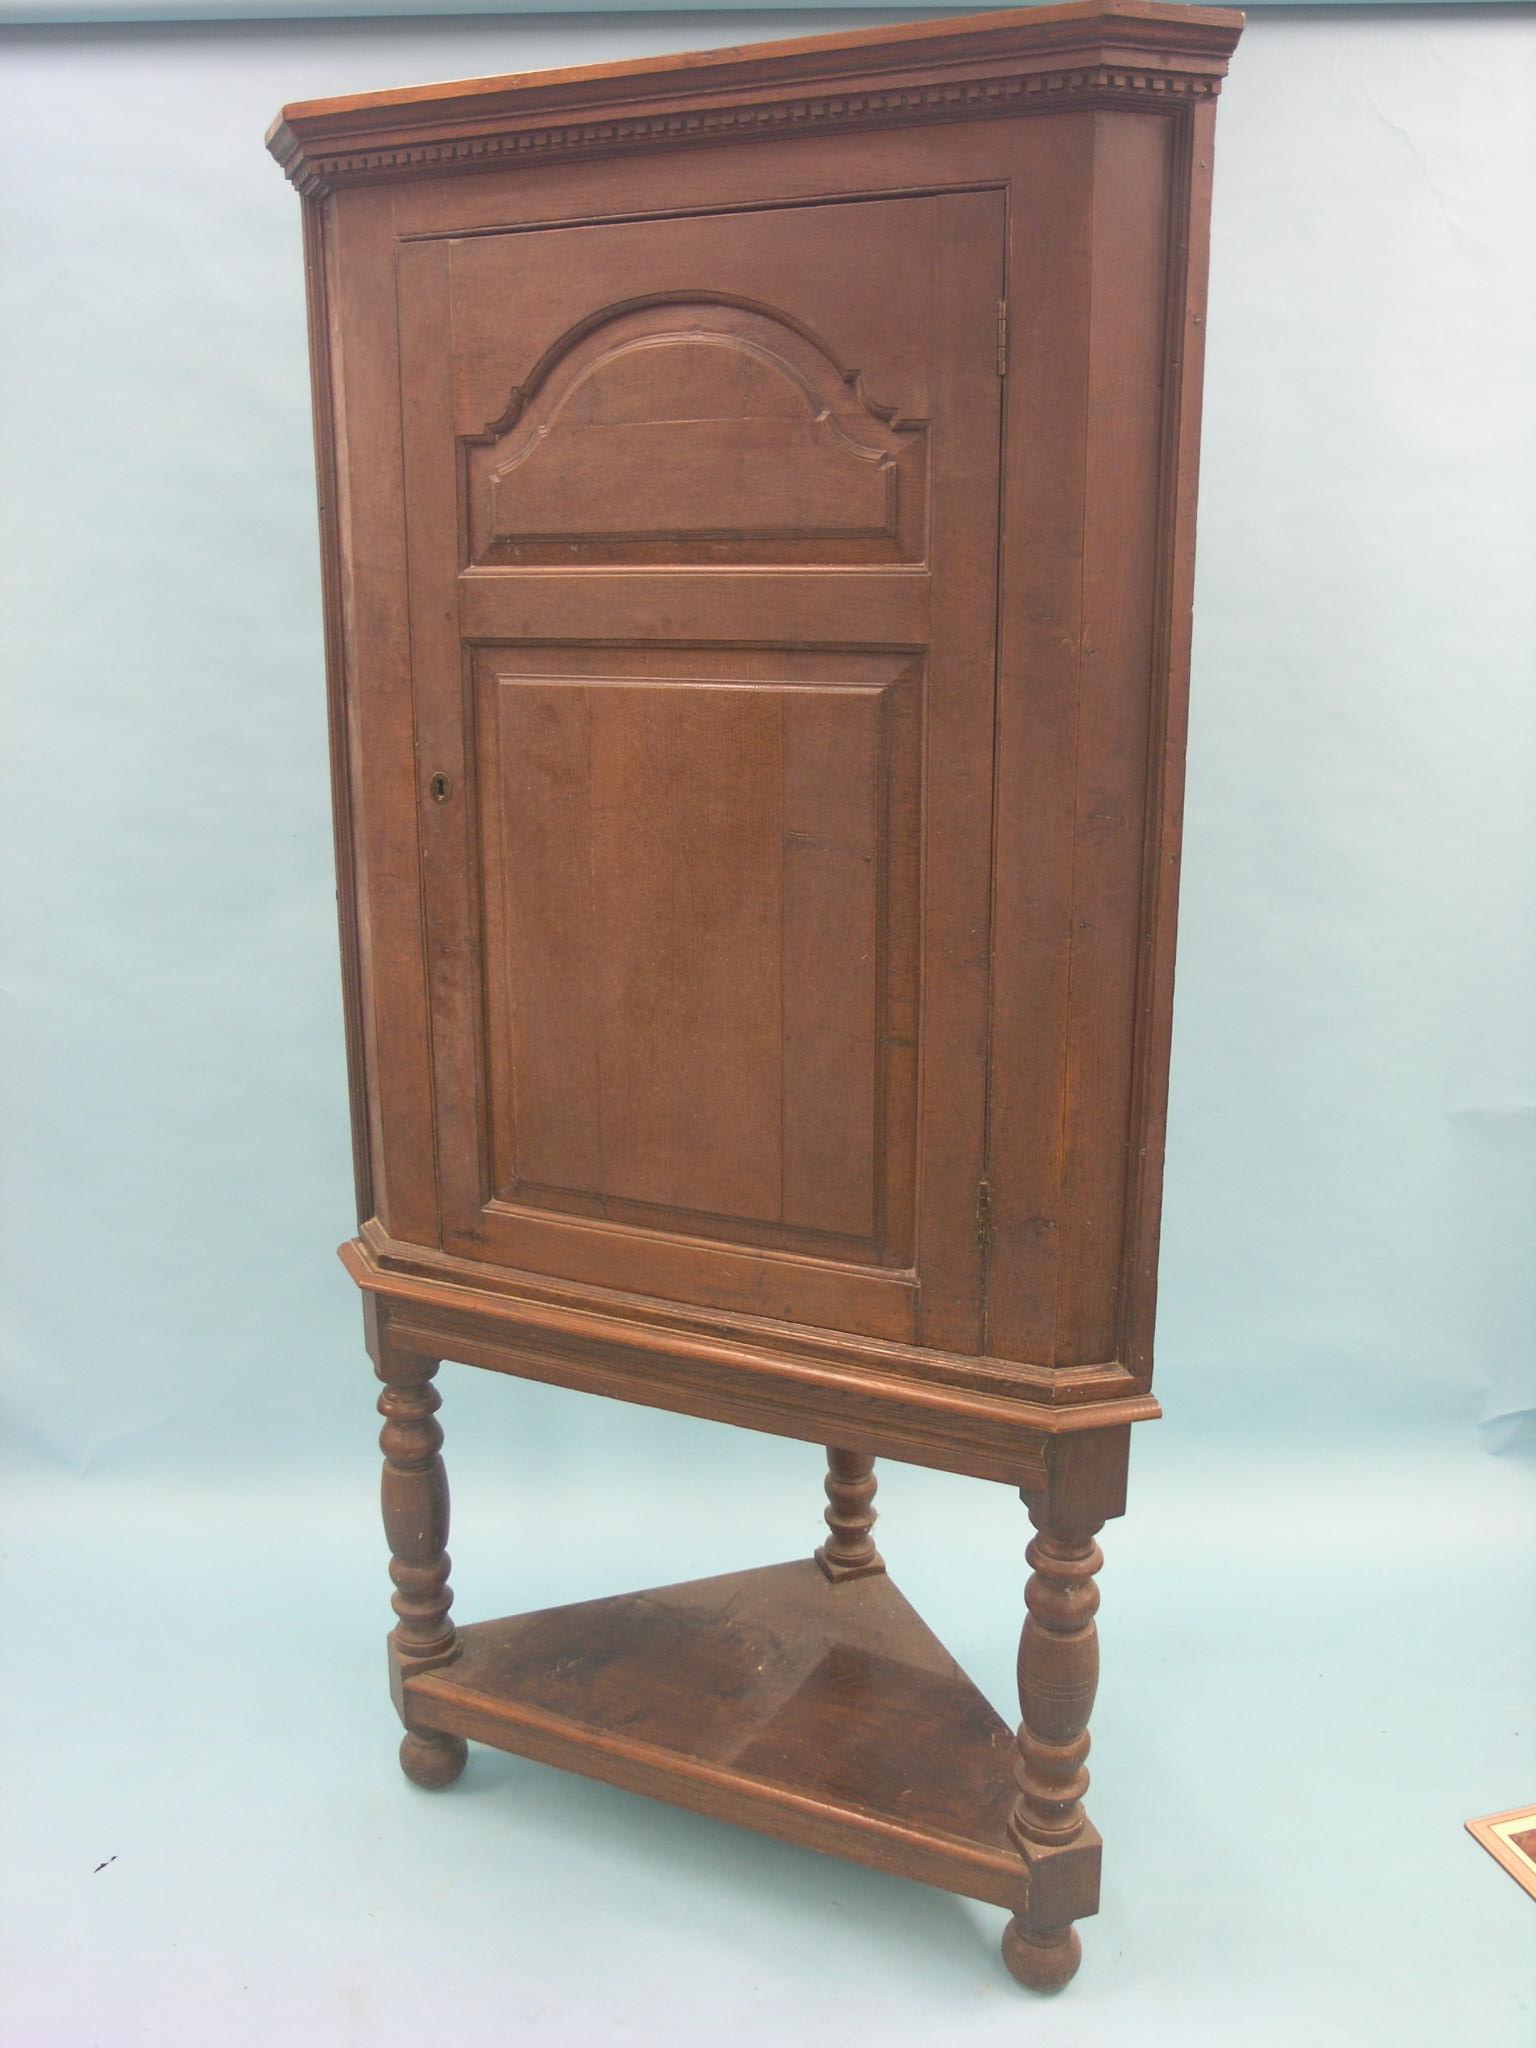 A large George II oak corner cupboard, door with fielded panels, two shaped shelves enclosed and